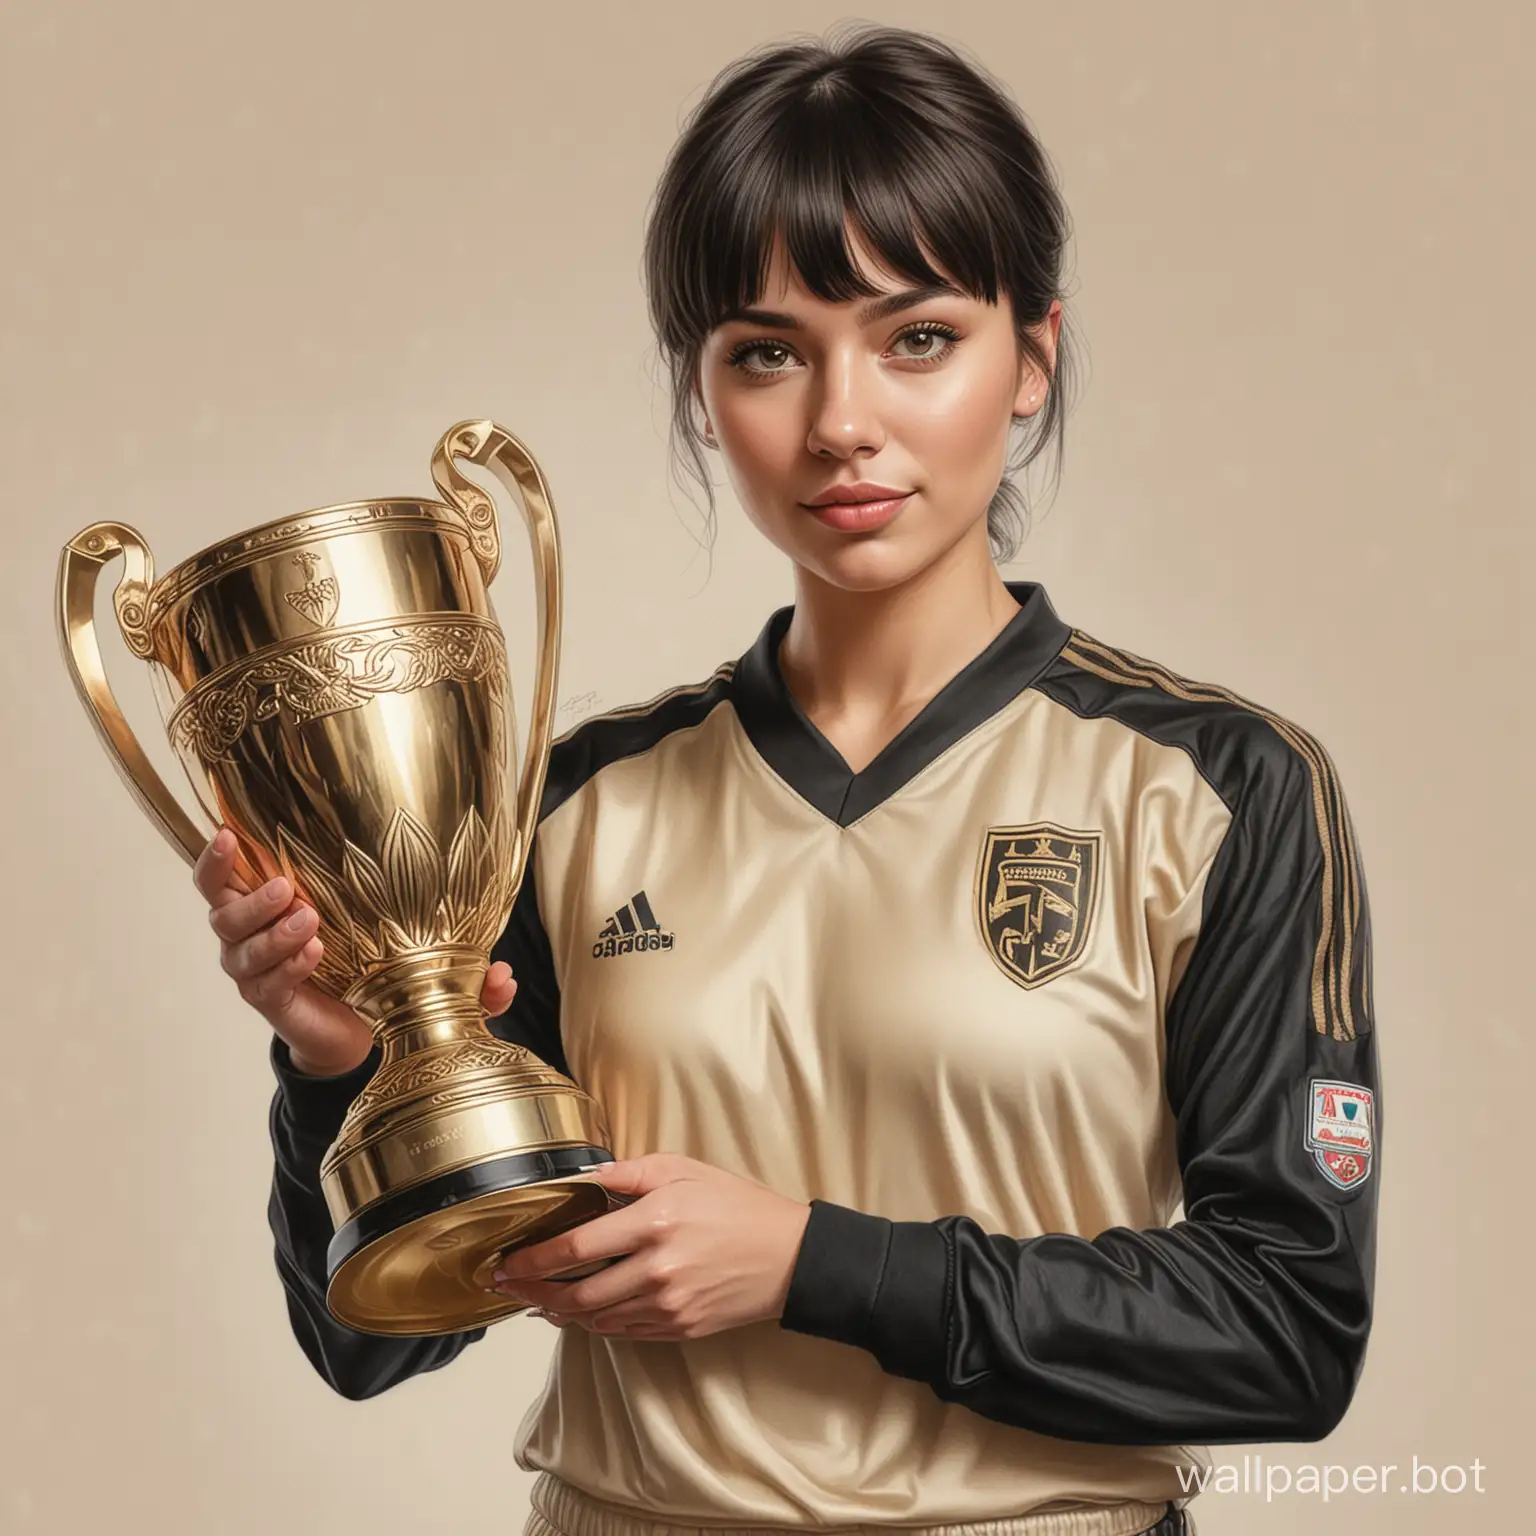 Realistic-Drawing-of-Alina-Lanina-Holding-Champions-Cup-in-Soccer-Uniform